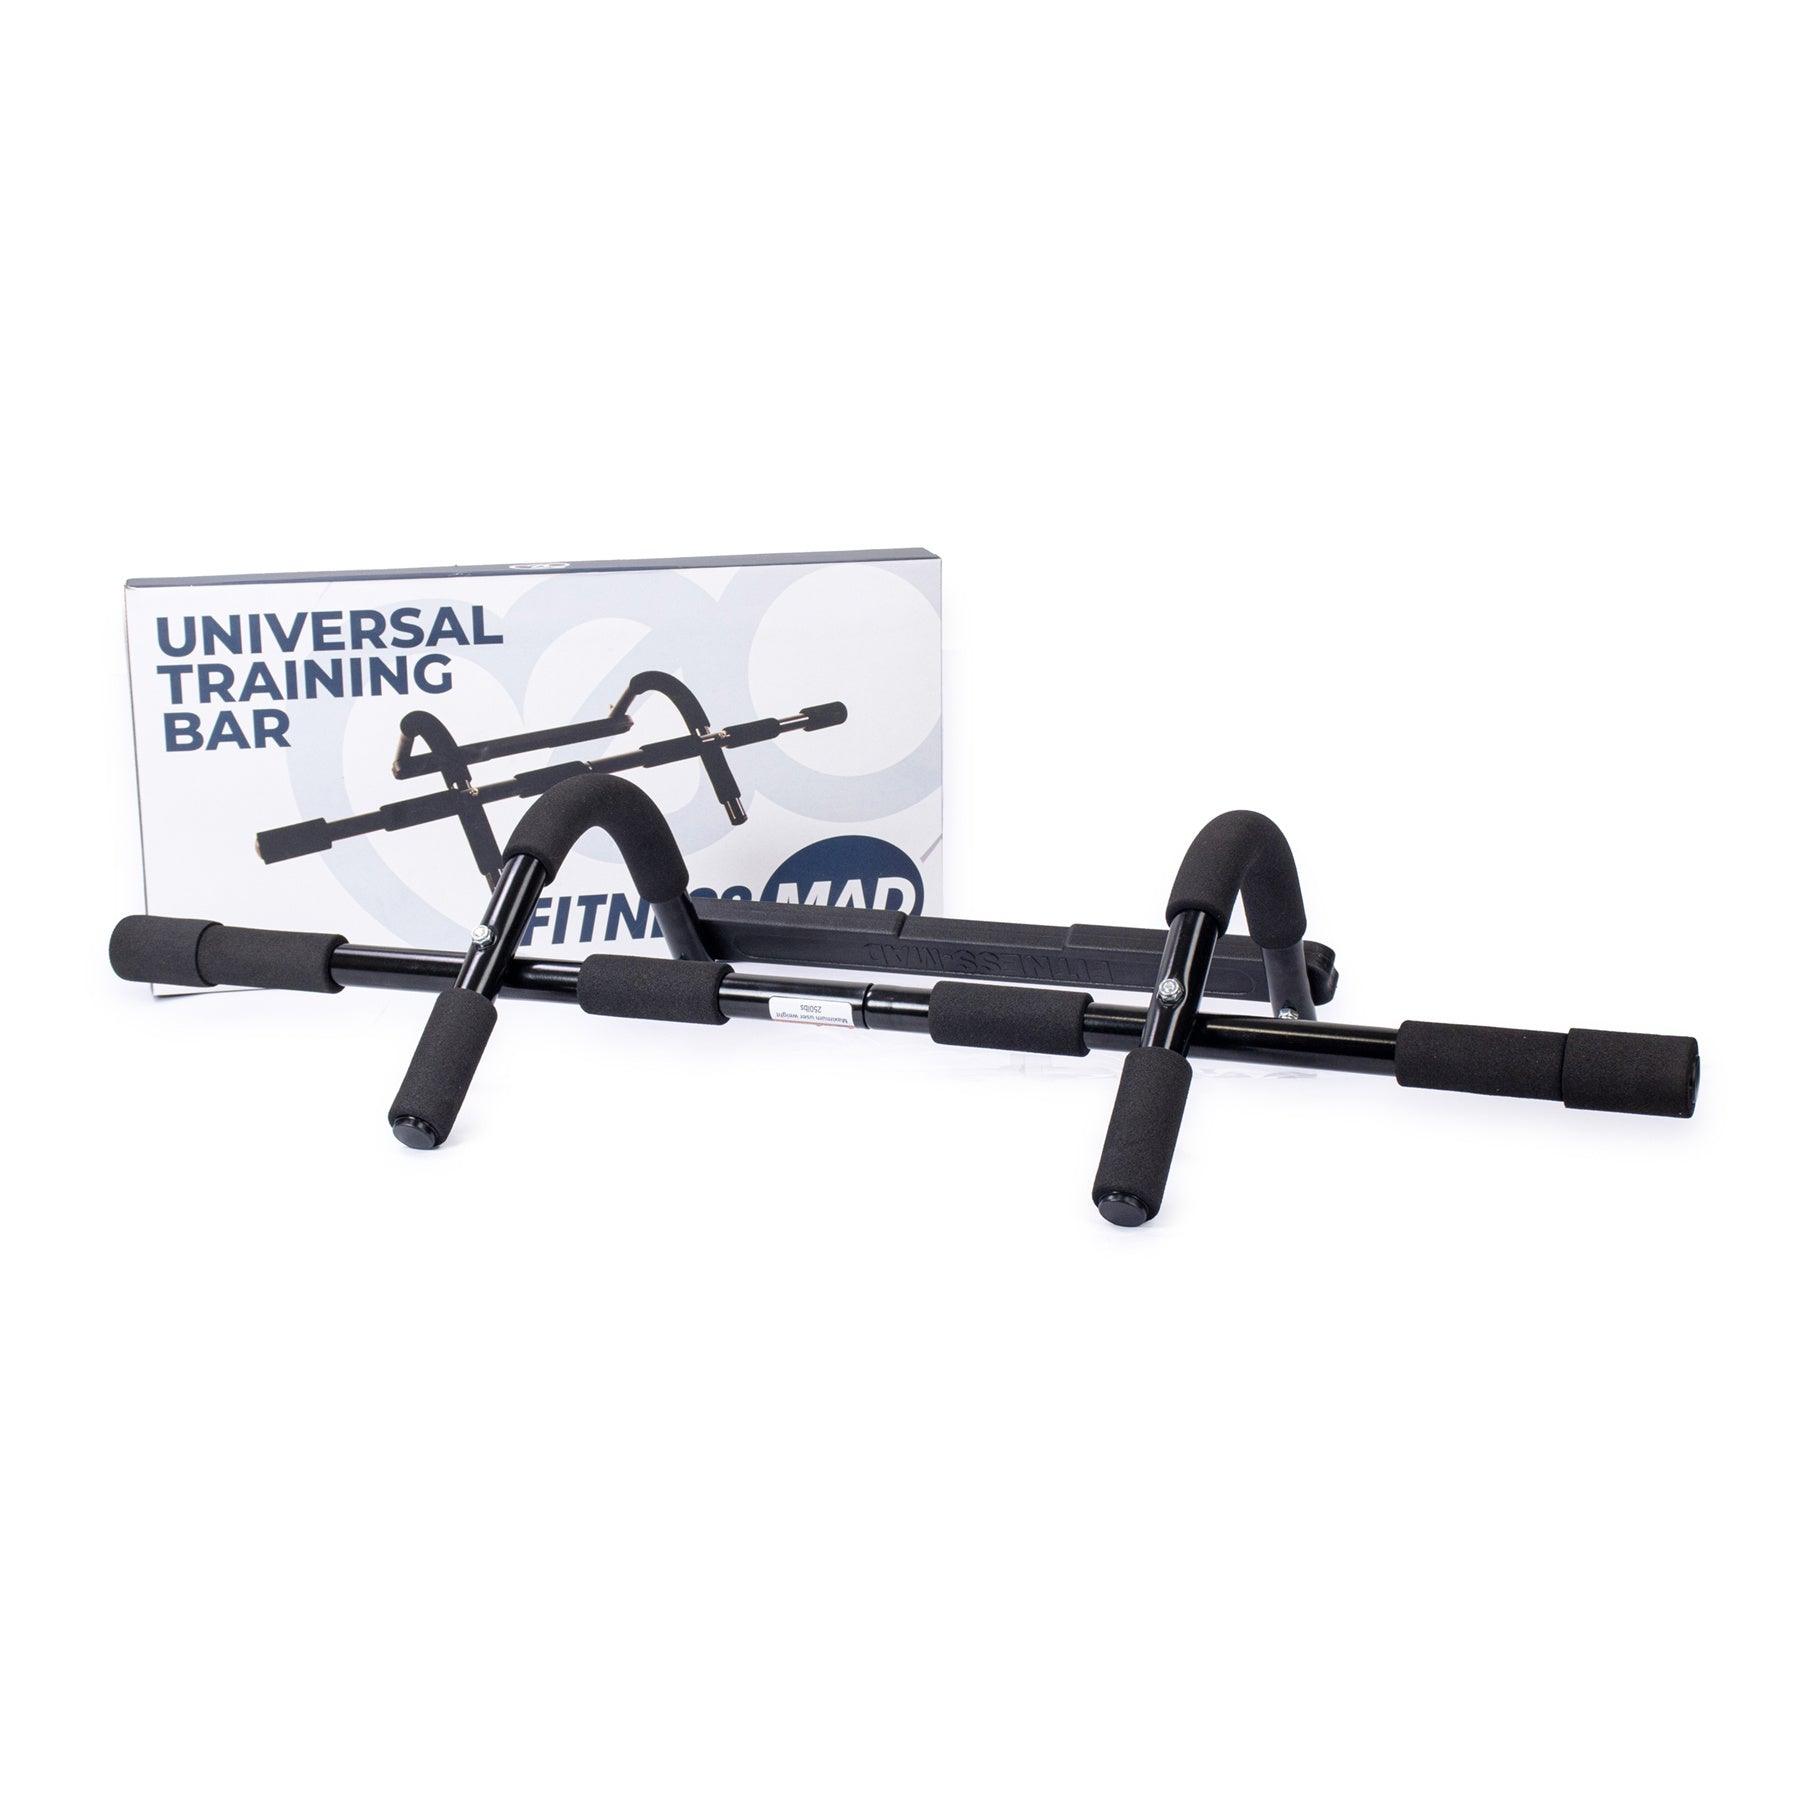 Strength Training Door Frame PULL-UP Bar - mad fitness fitness home workout image 4